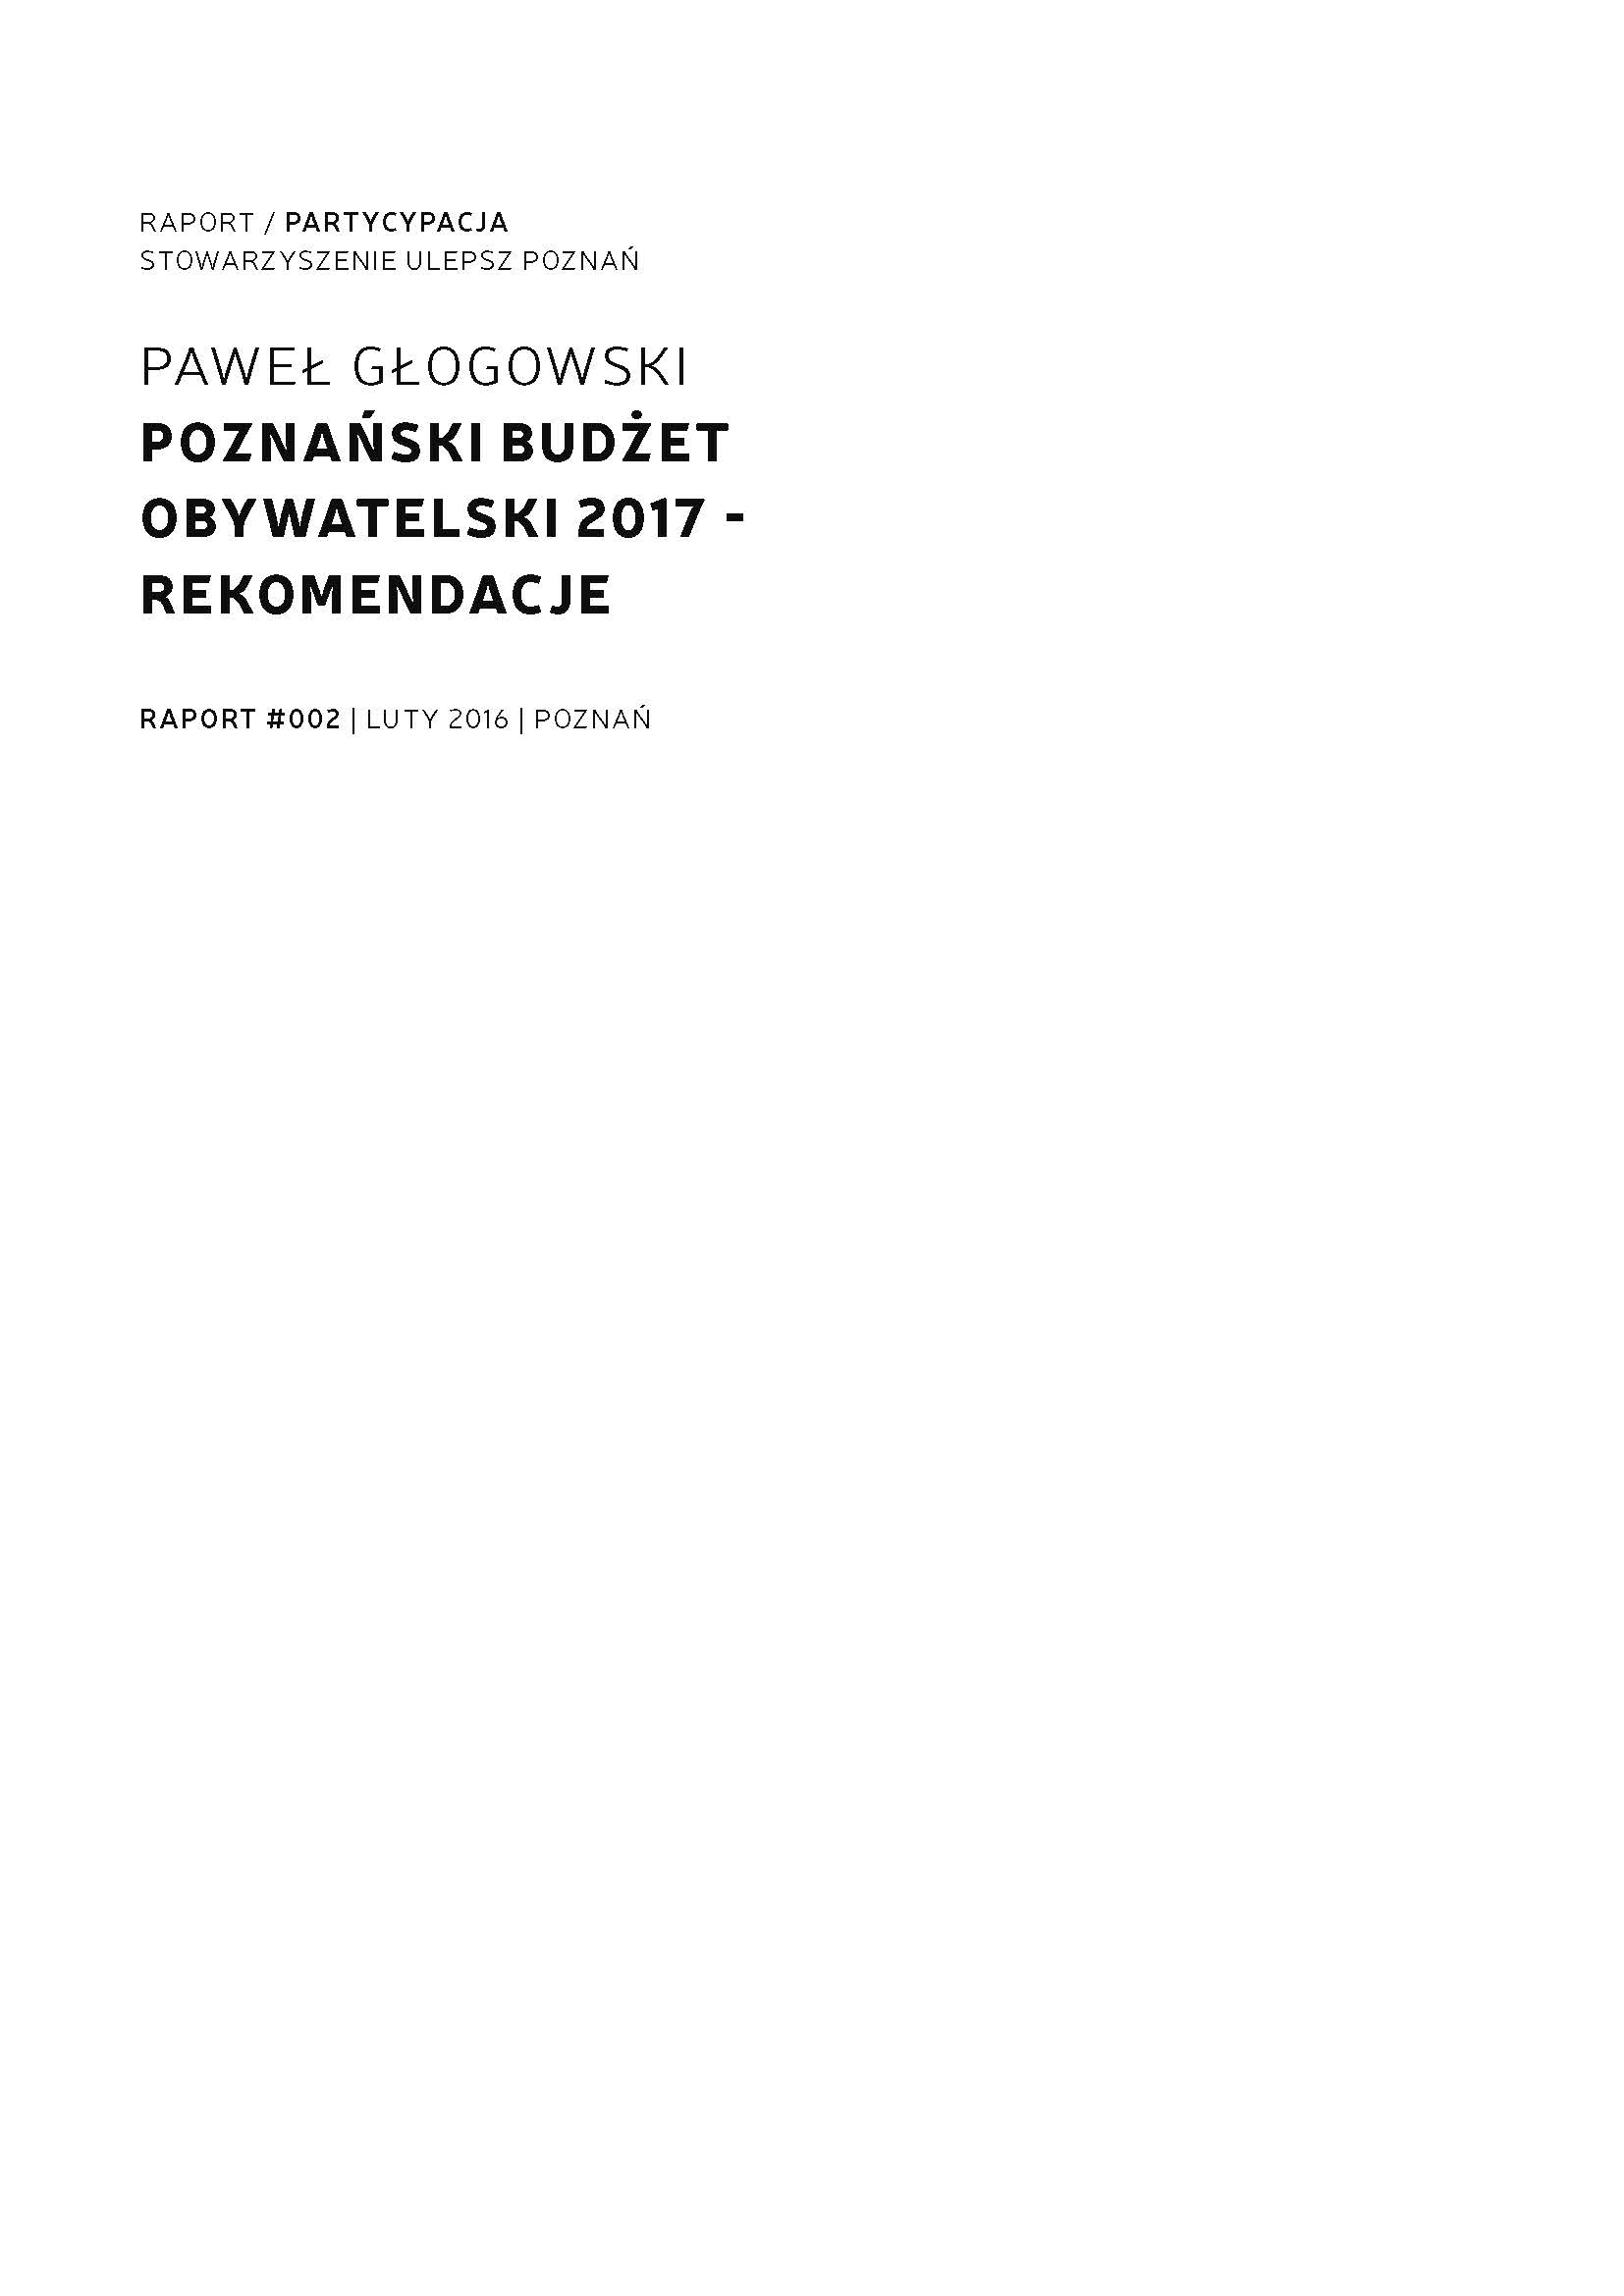 Poznan Participatory Budget 2017 - Recommendations Cover Image